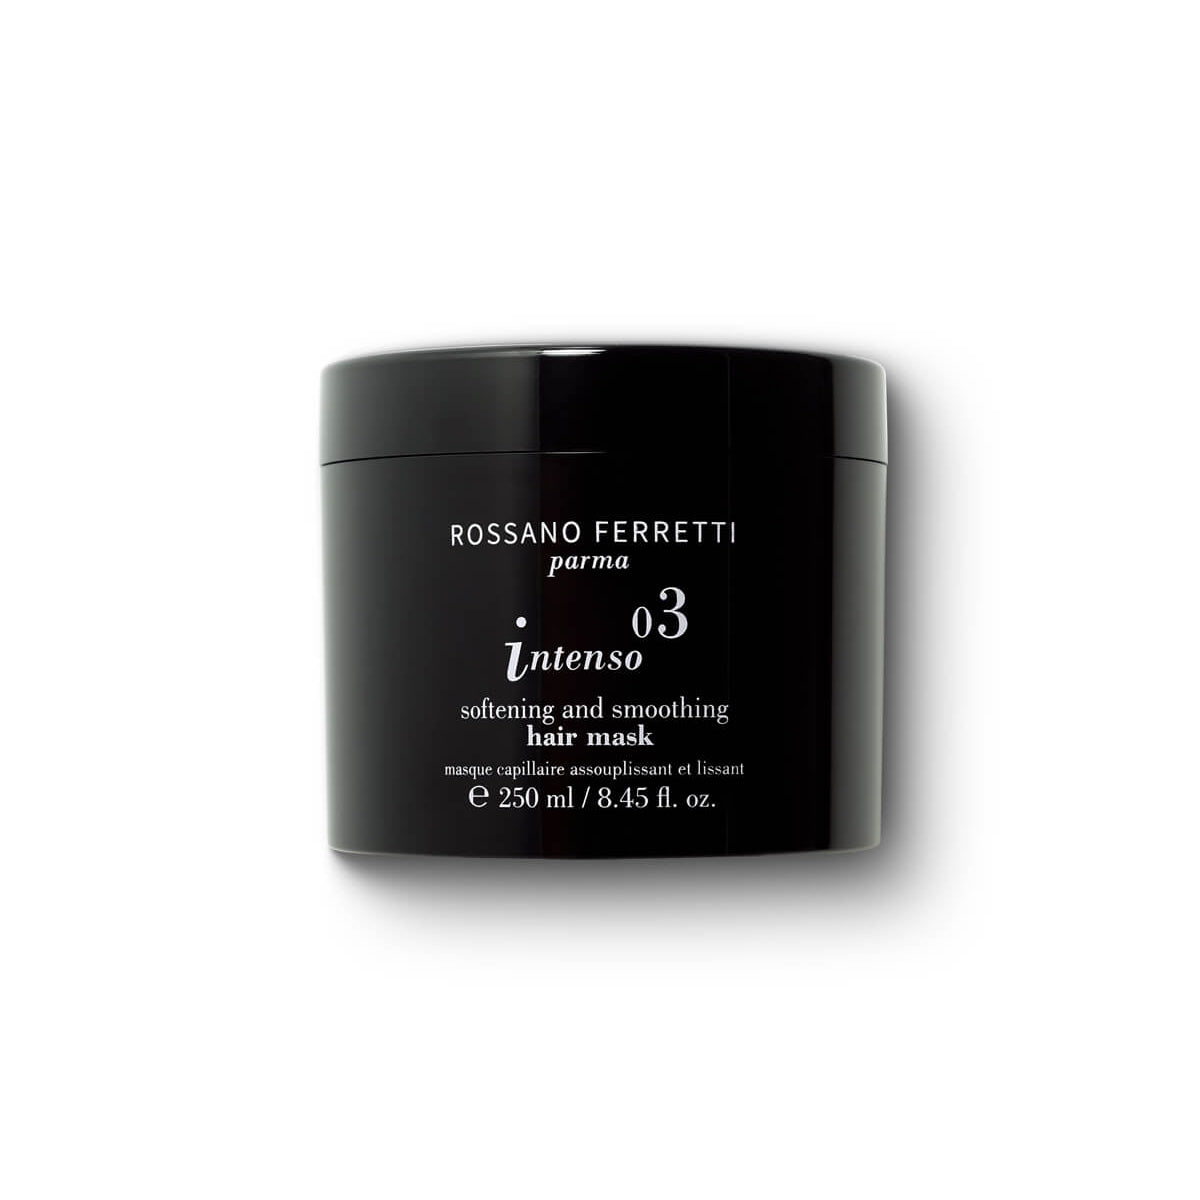 Rossano Ferretti Intenso Softening and Smoothing Hair Mask 250 ml / 8.43 fl. oz